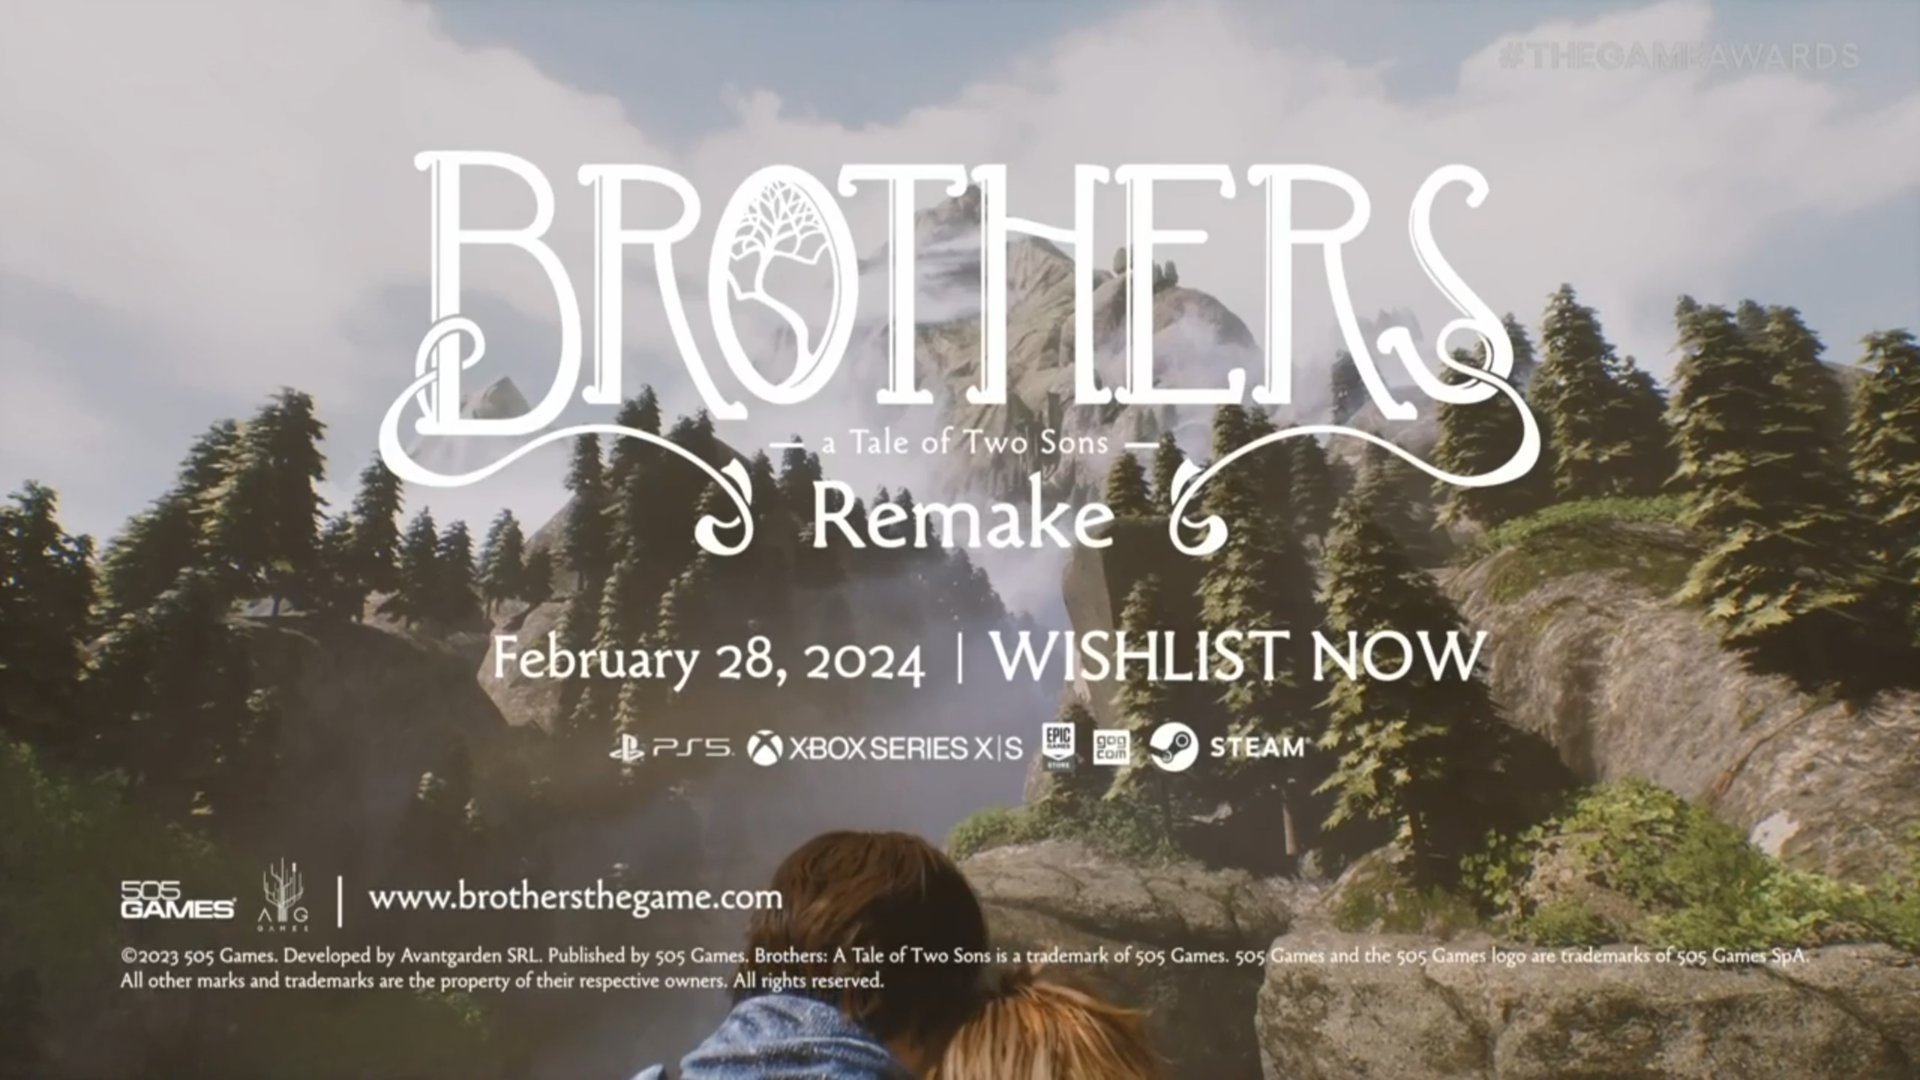 Idle Sloth💙💛 on X: Brothers: A Tale of Two Sons Remake #TheGameAwards  Guide two brothers on an epic fairy tale journey of discovery, loss,  adventure and mystery in Brothers: A Tale of